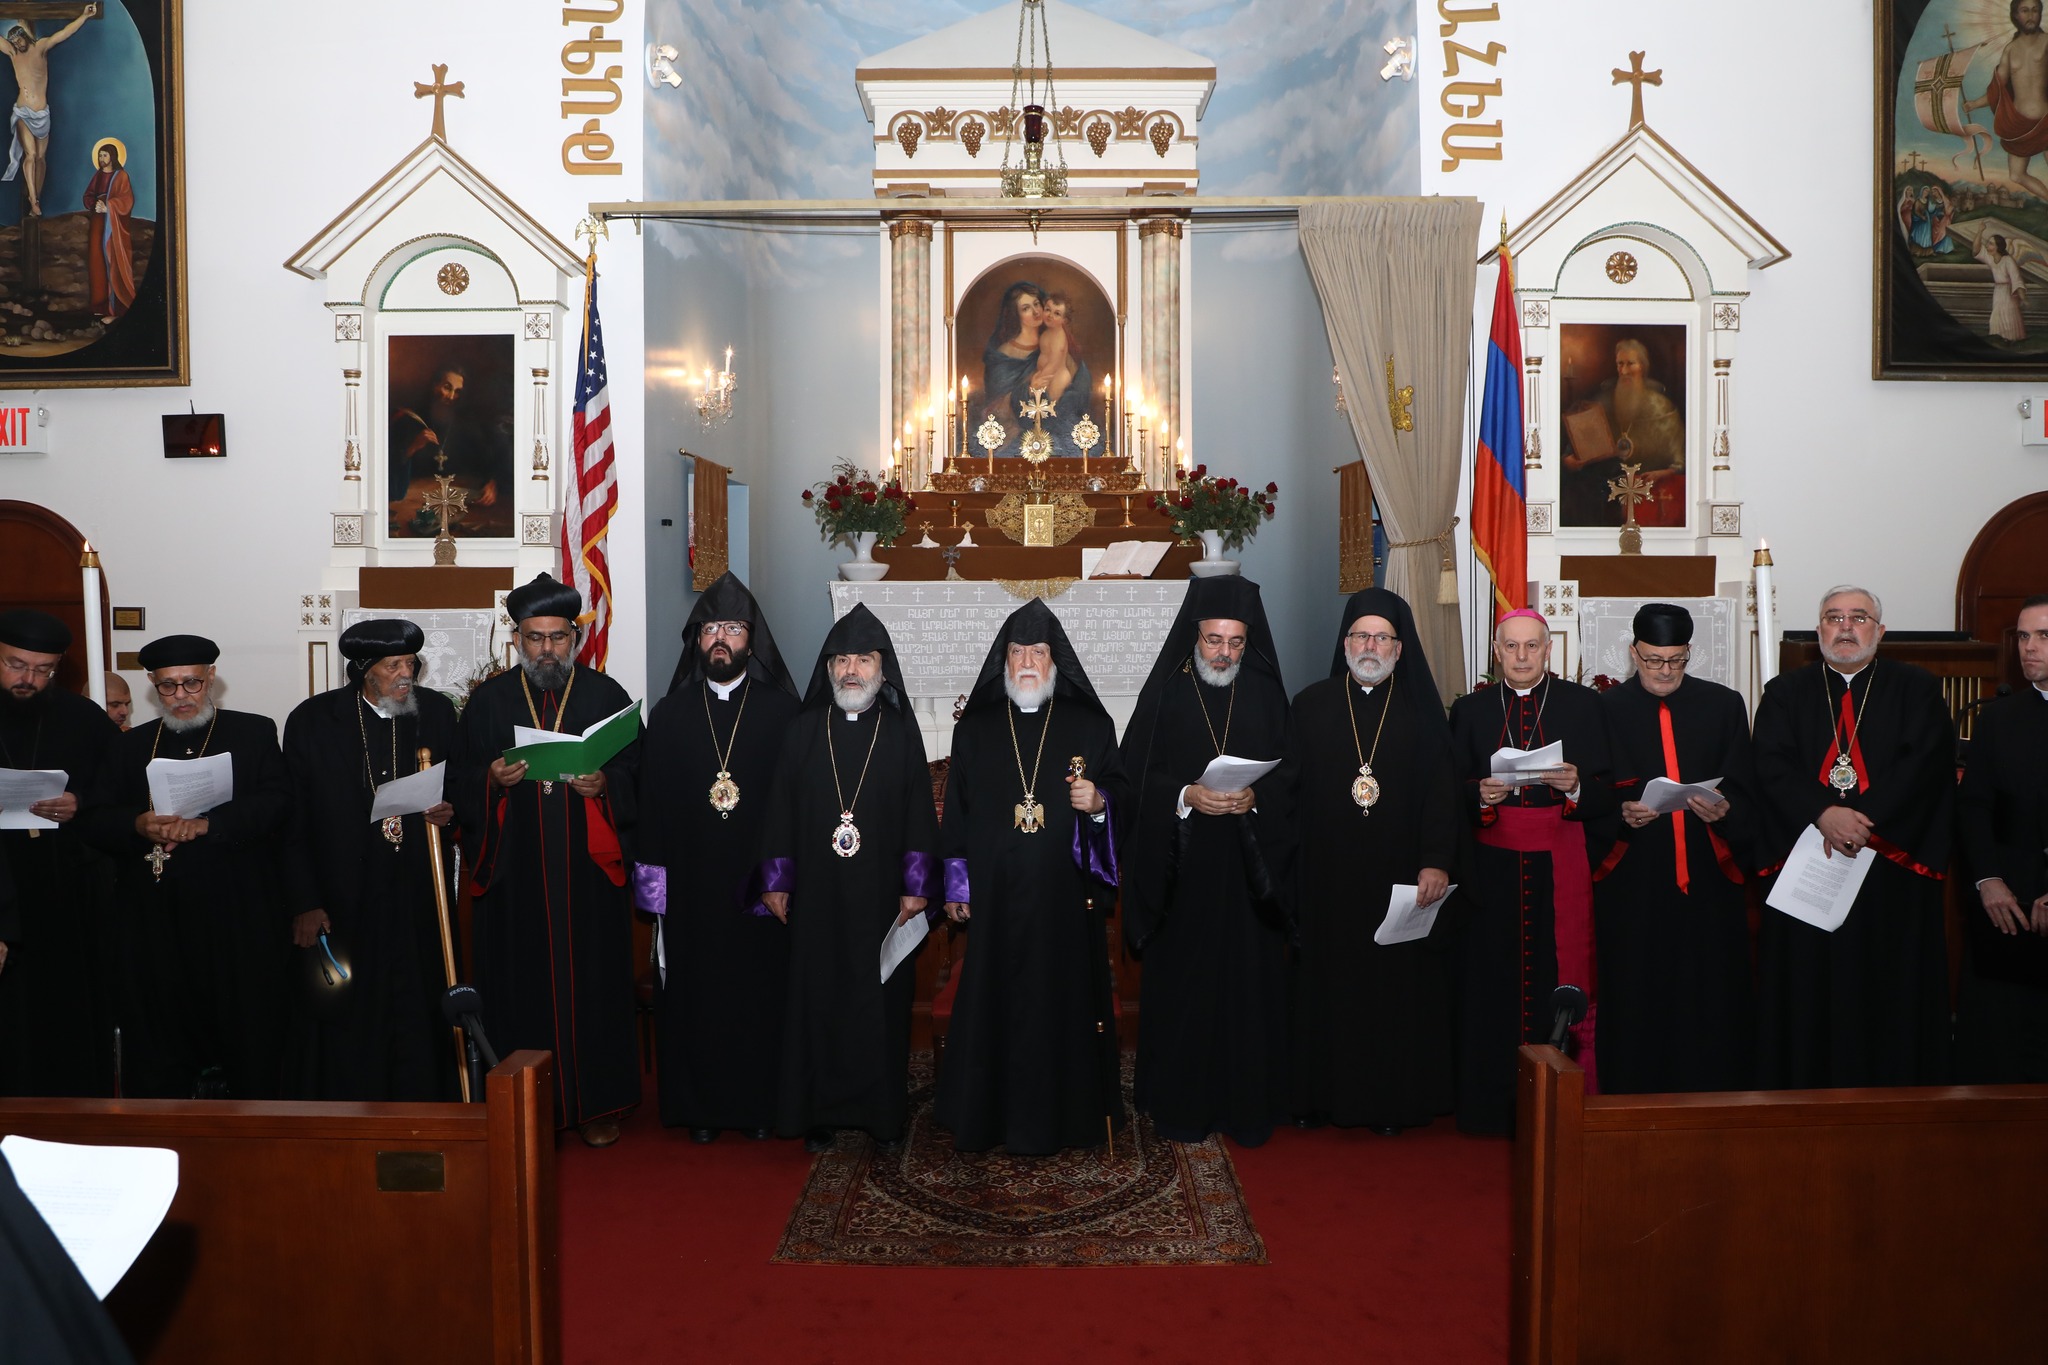 Orthodox Hierarchs Join Catholicos Aram I for Ecumenical Prayers at St. Illuminator’s Cathedral in New York